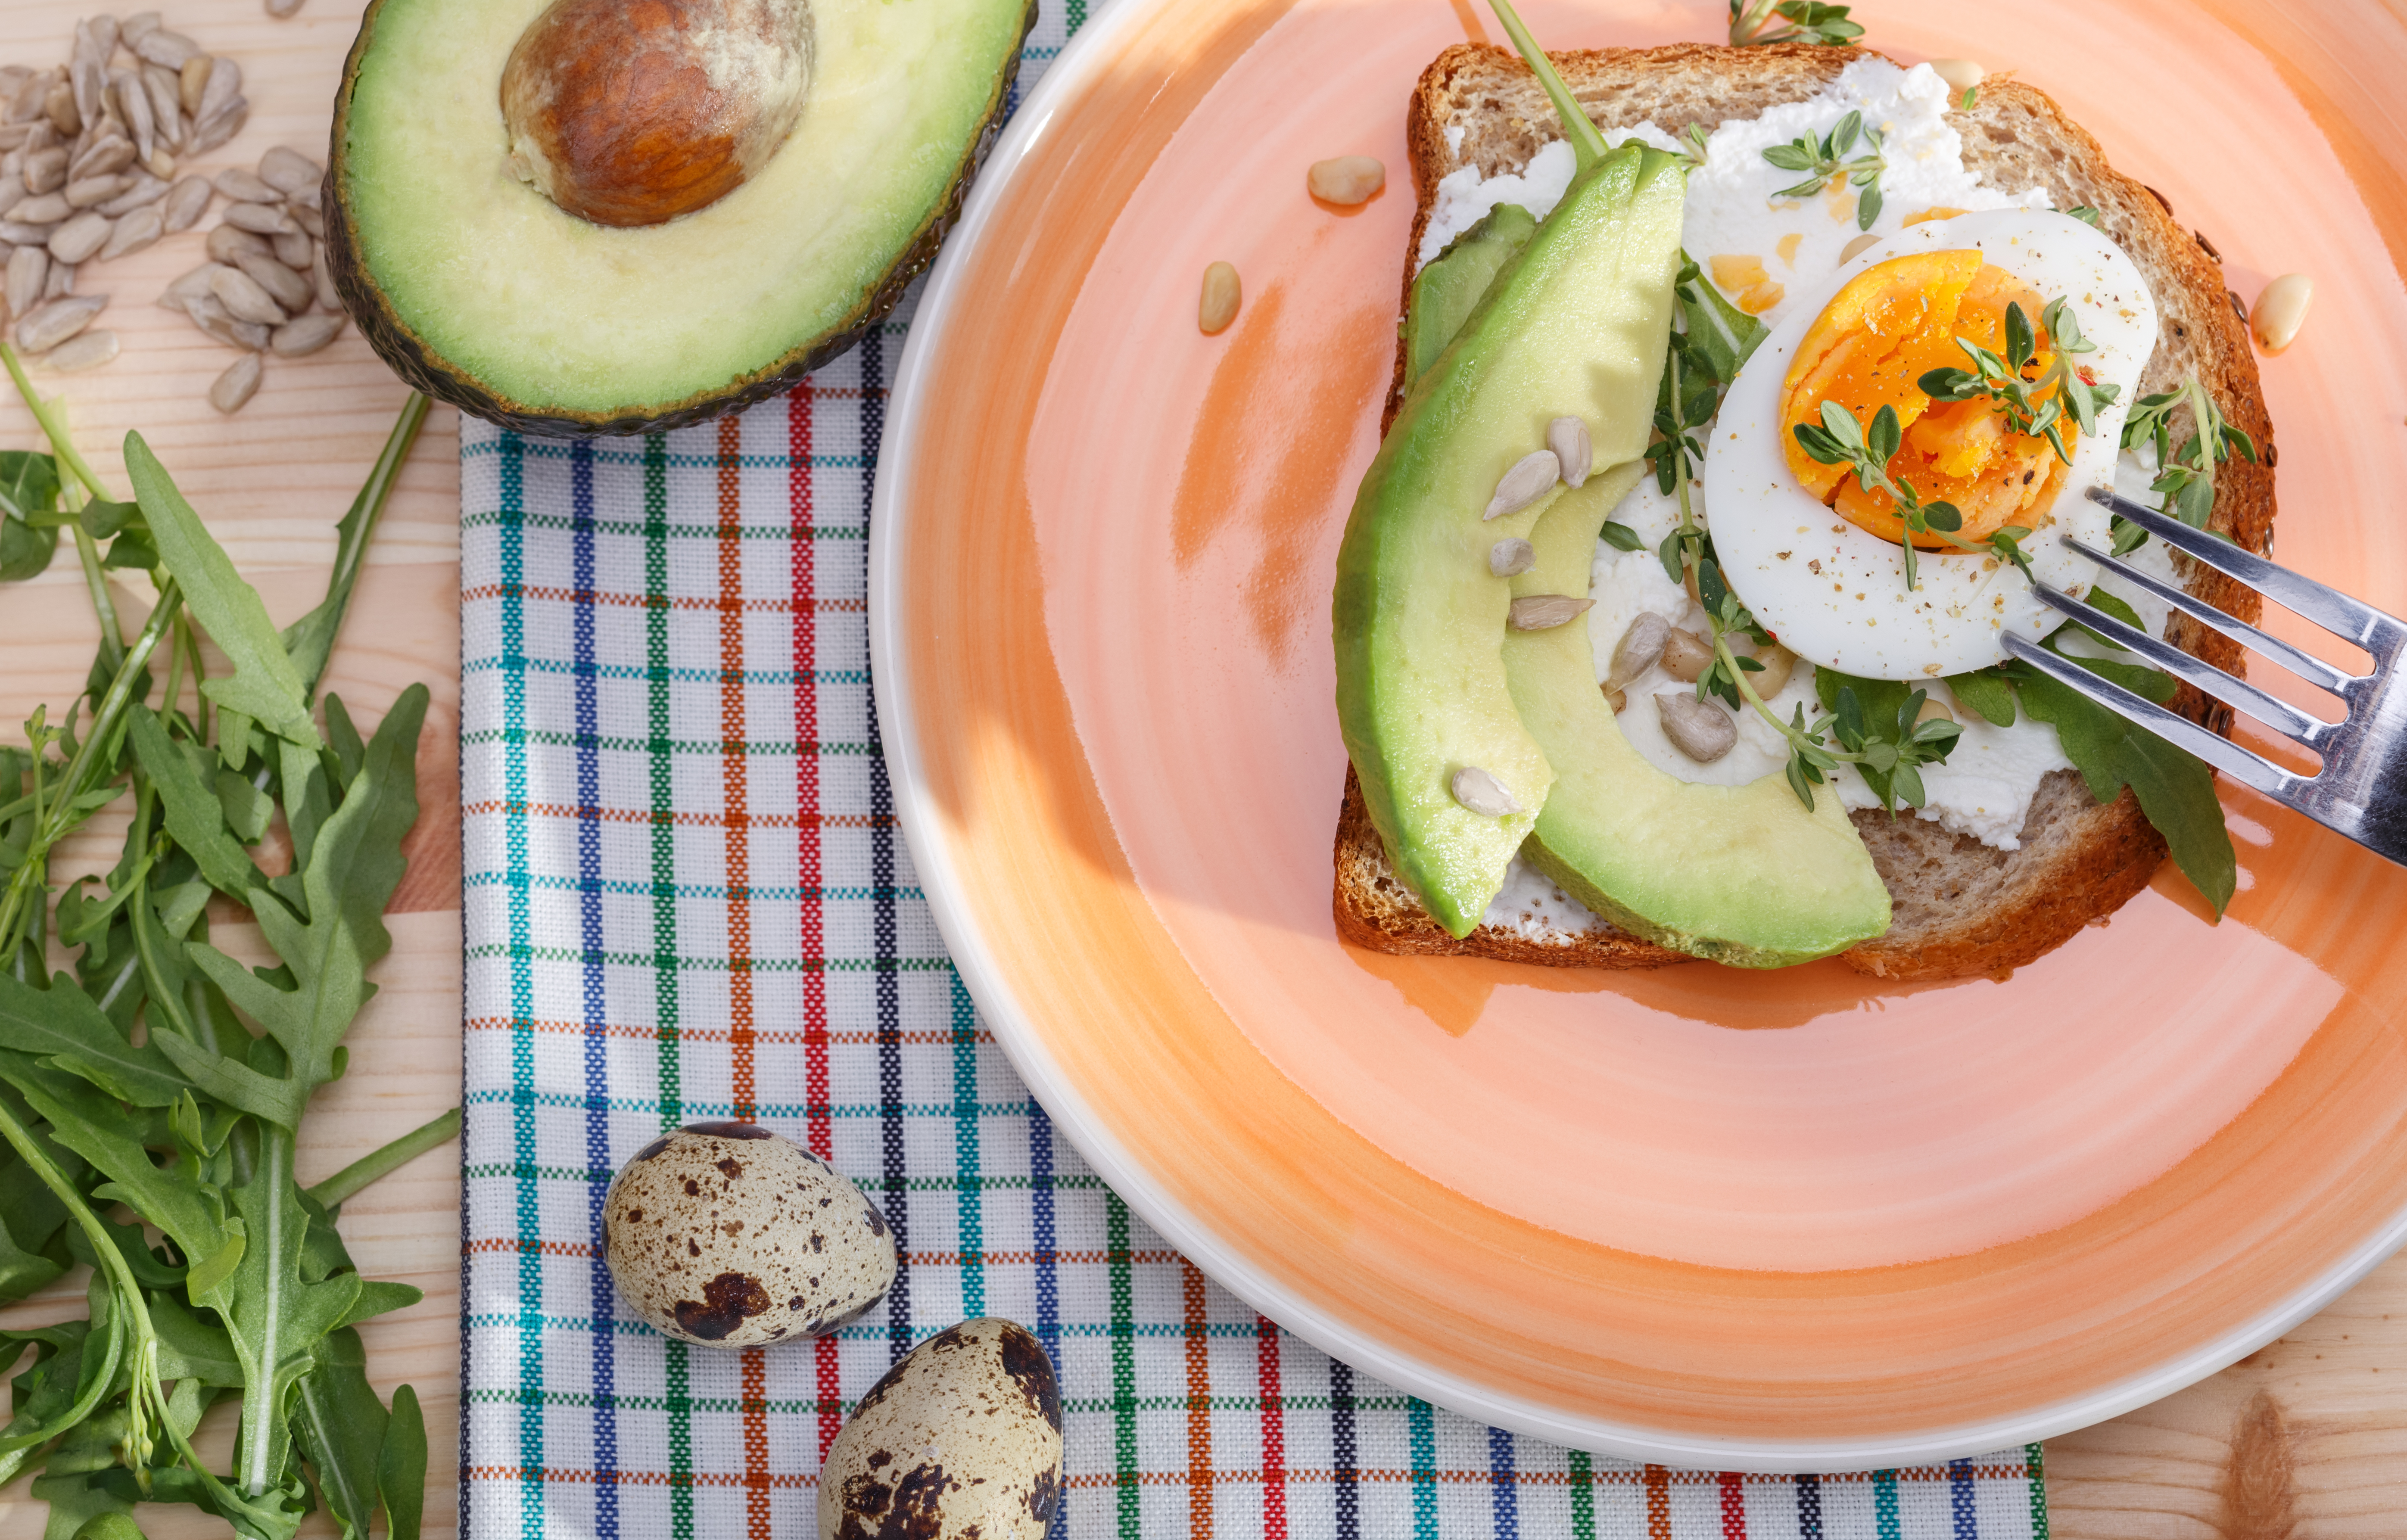 A plate with a piece of toast topped with avocado and egg, with a halved avocado next to the plate.